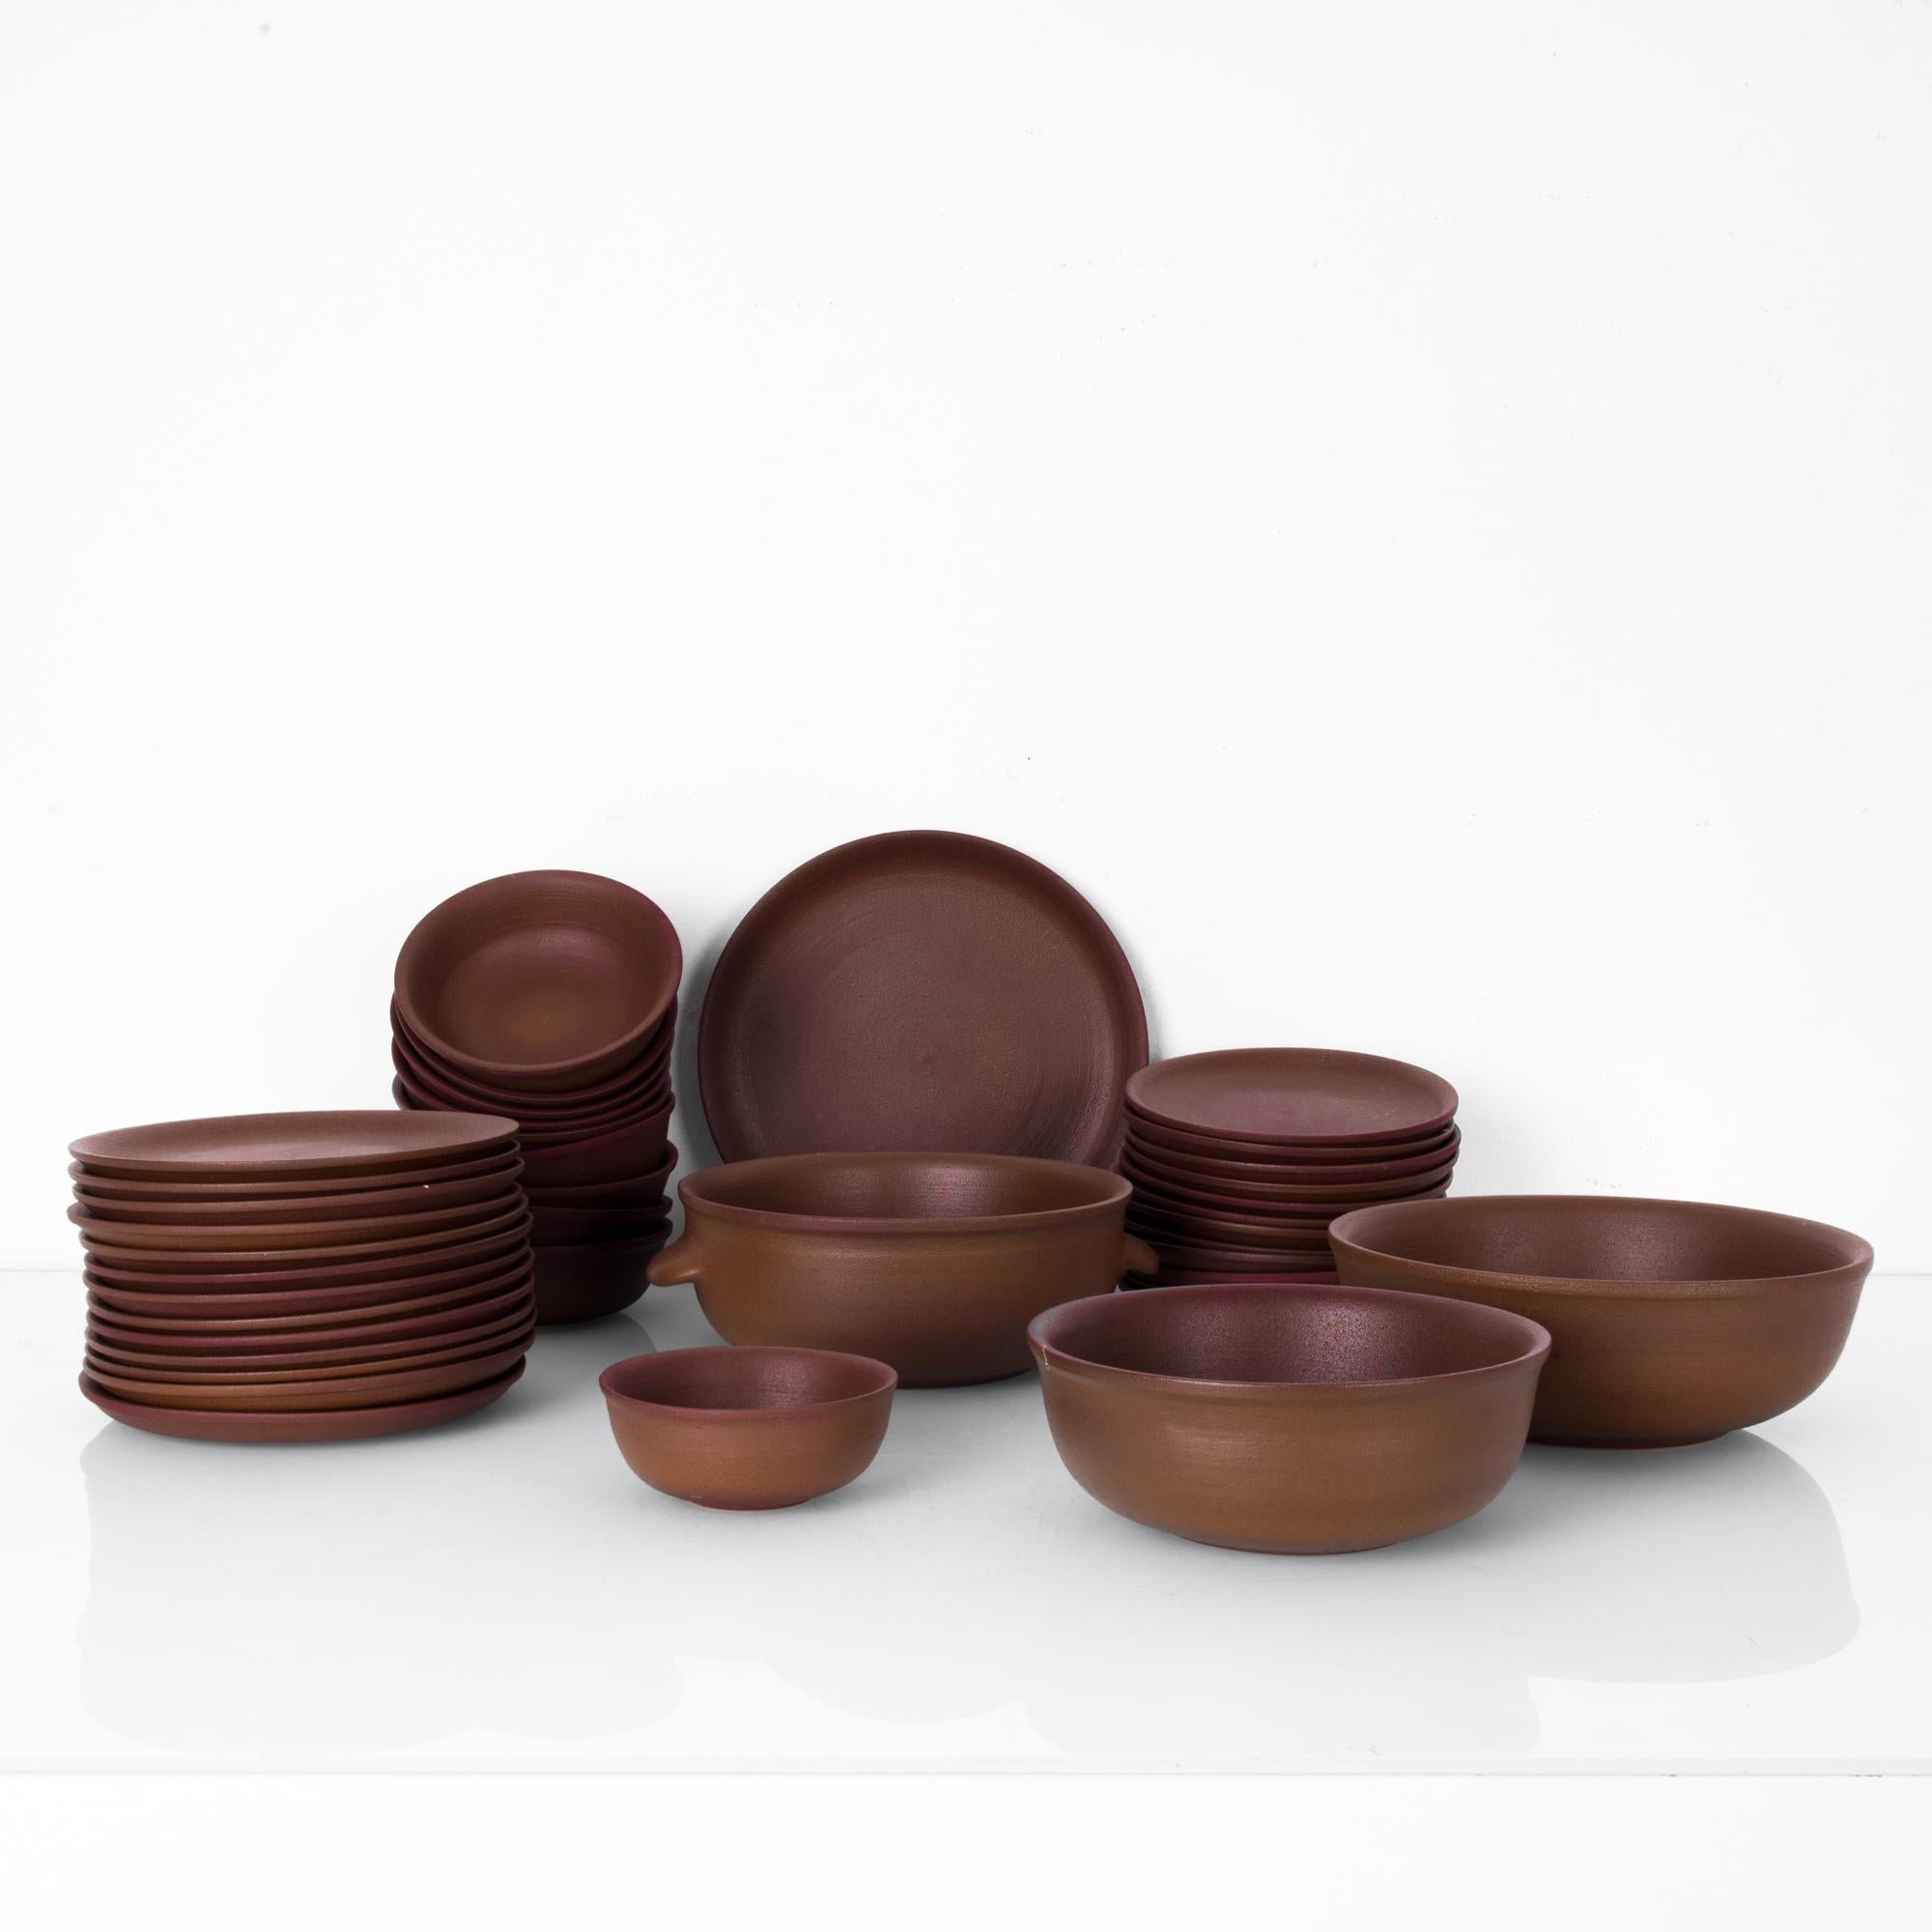 This 39-piece set of ceramic dinnerware includes dinner plates, side plates, bowls, and serving ware, in a beautiful earthy brown. It was made in Belgium, circa 1970. The simple and elegant forms allow the rich and warm tones of the pottery to stand